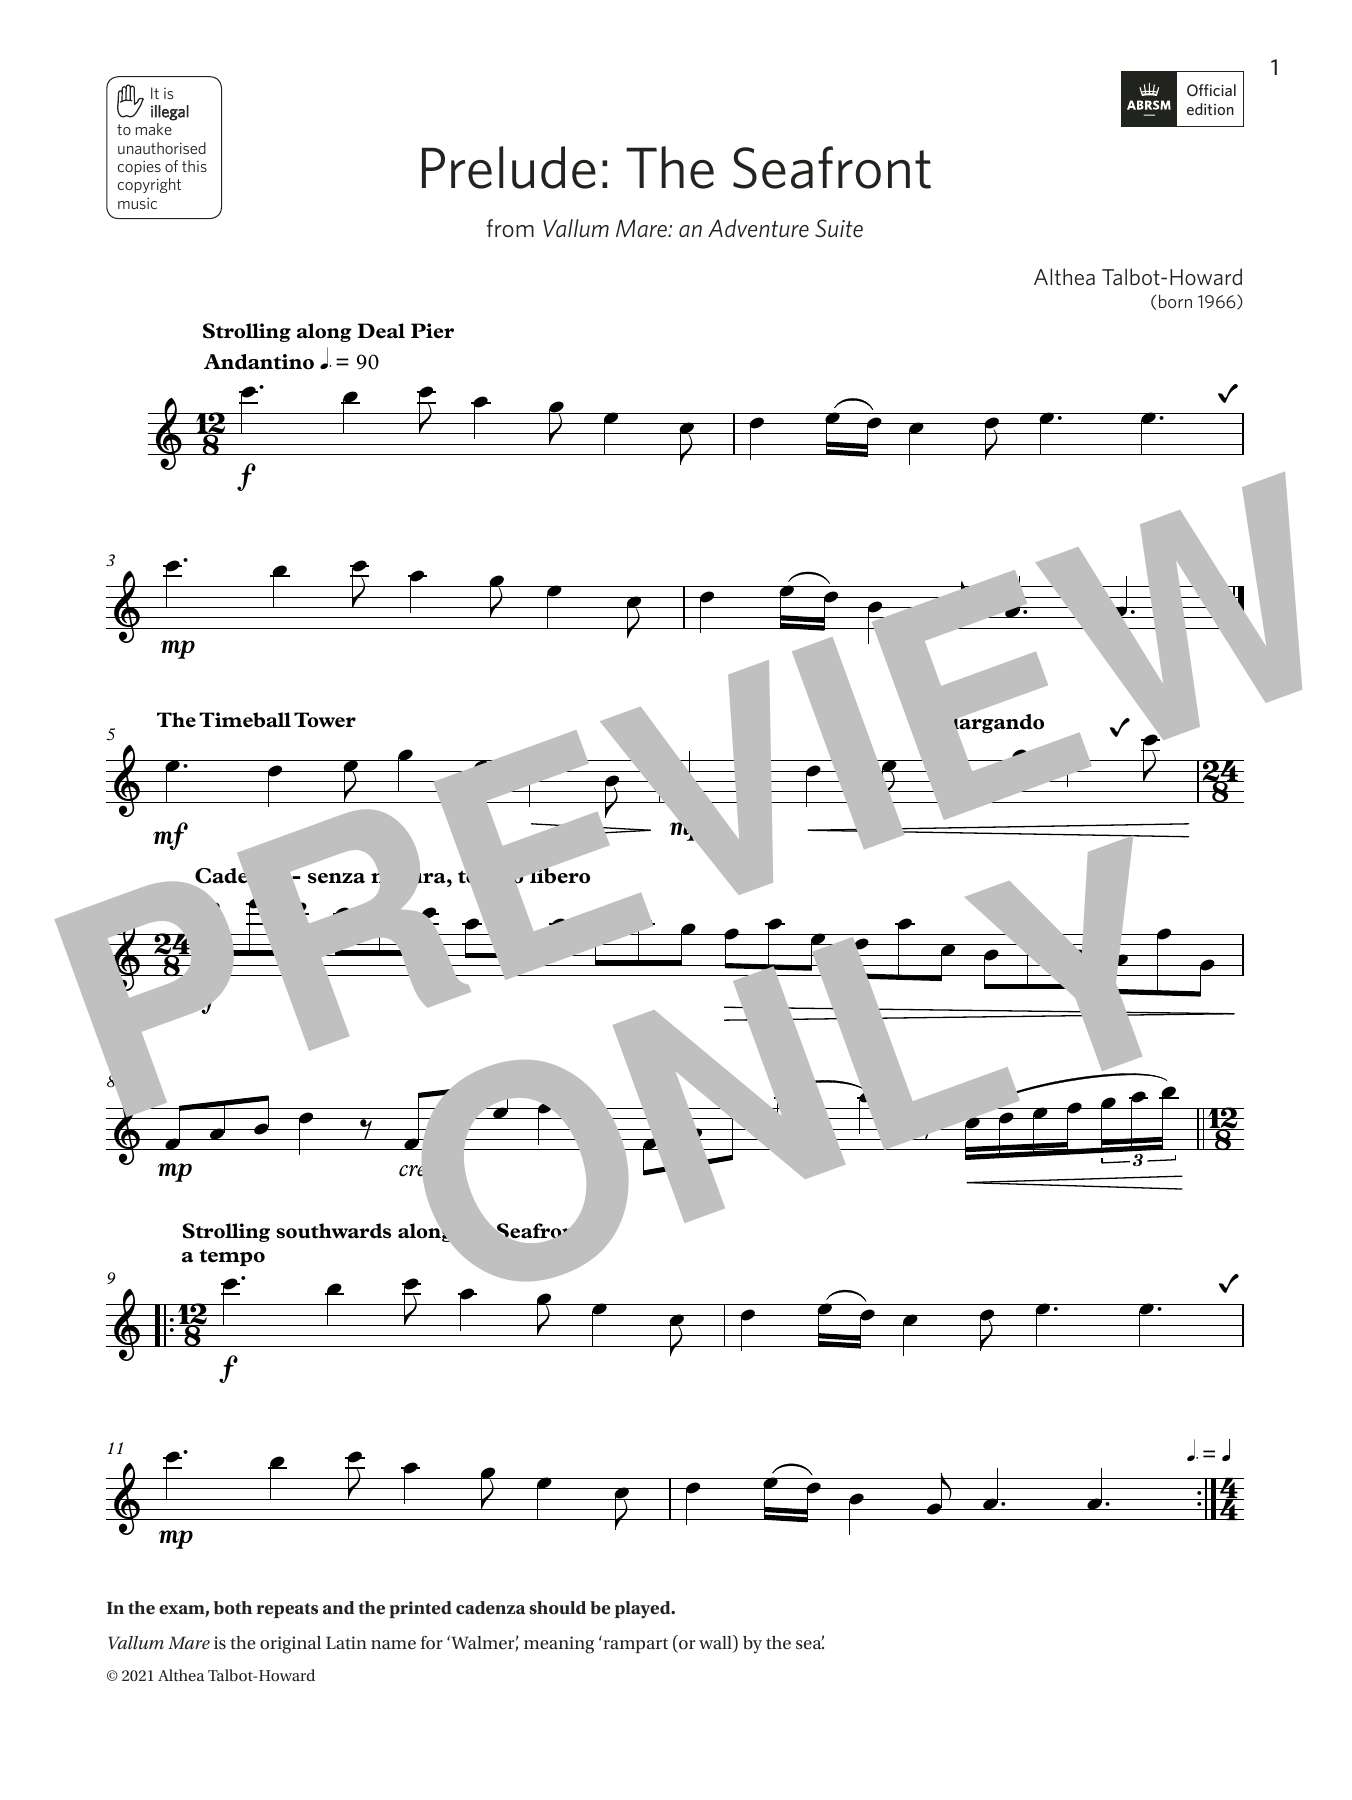 Download Althea Talbot-Howard Prelude: The Seafront (Grade 5 List B10 Sheet Music